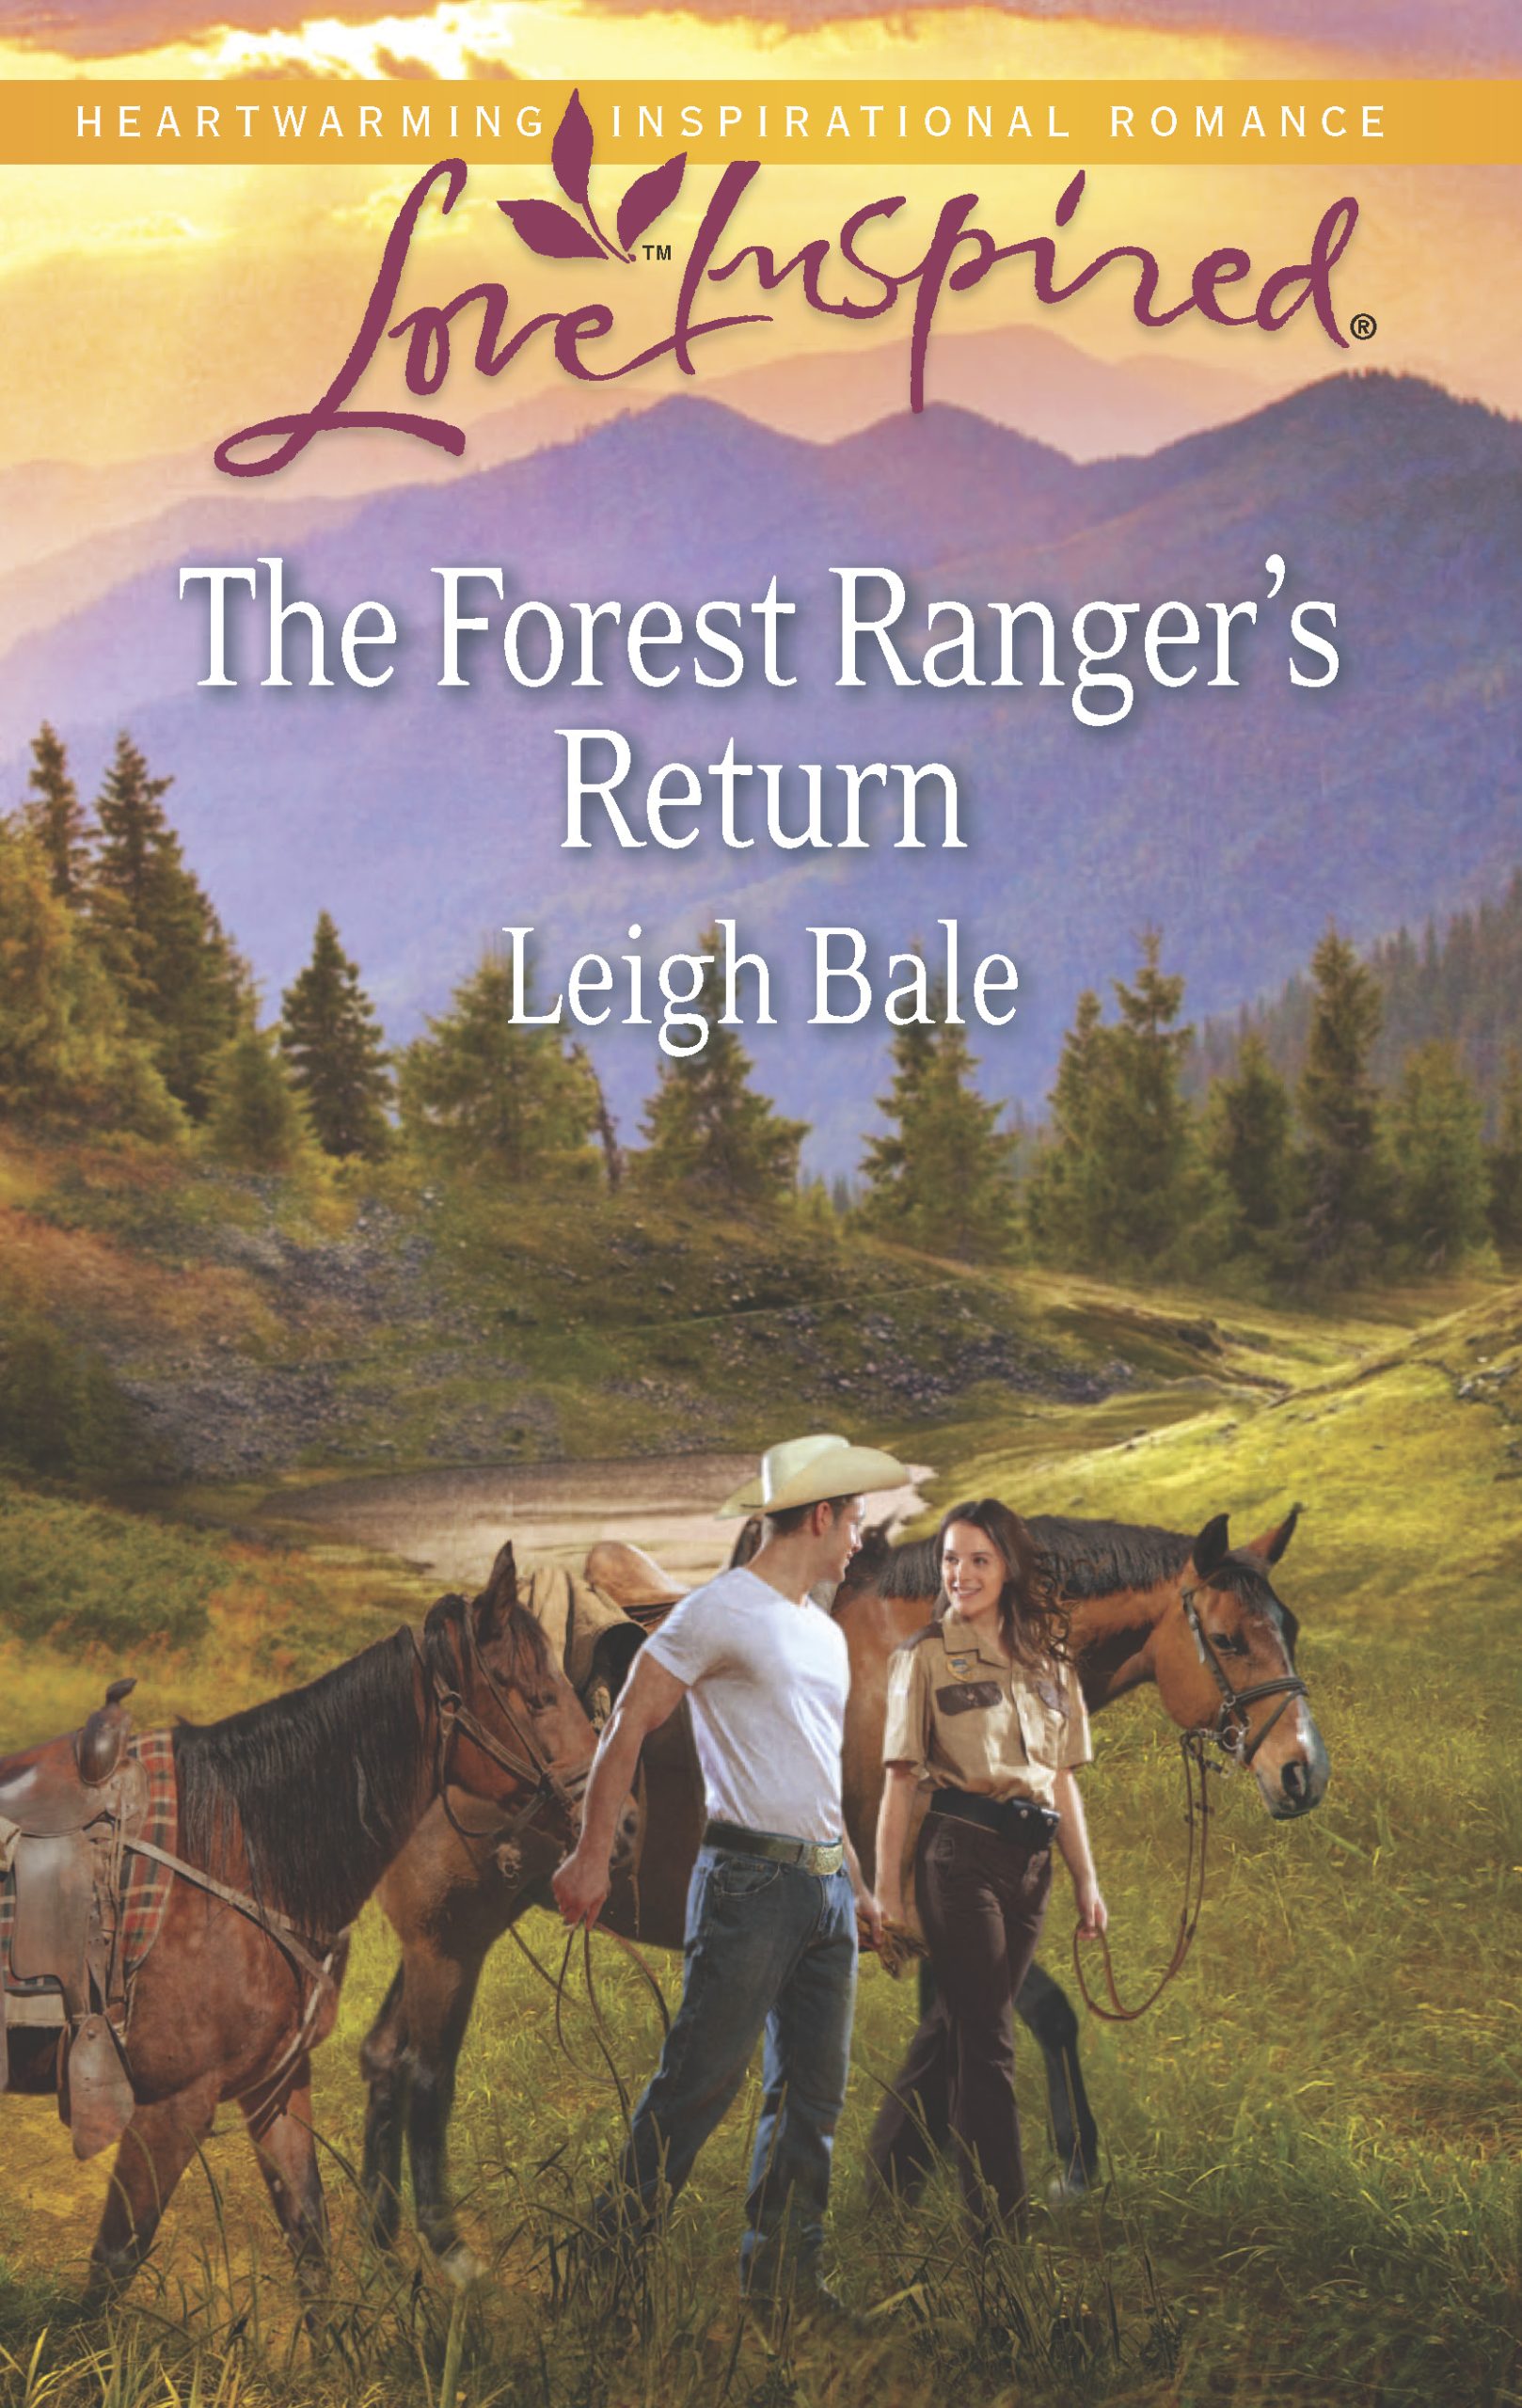 The Forest Ranger’s Return by Leigh Bale